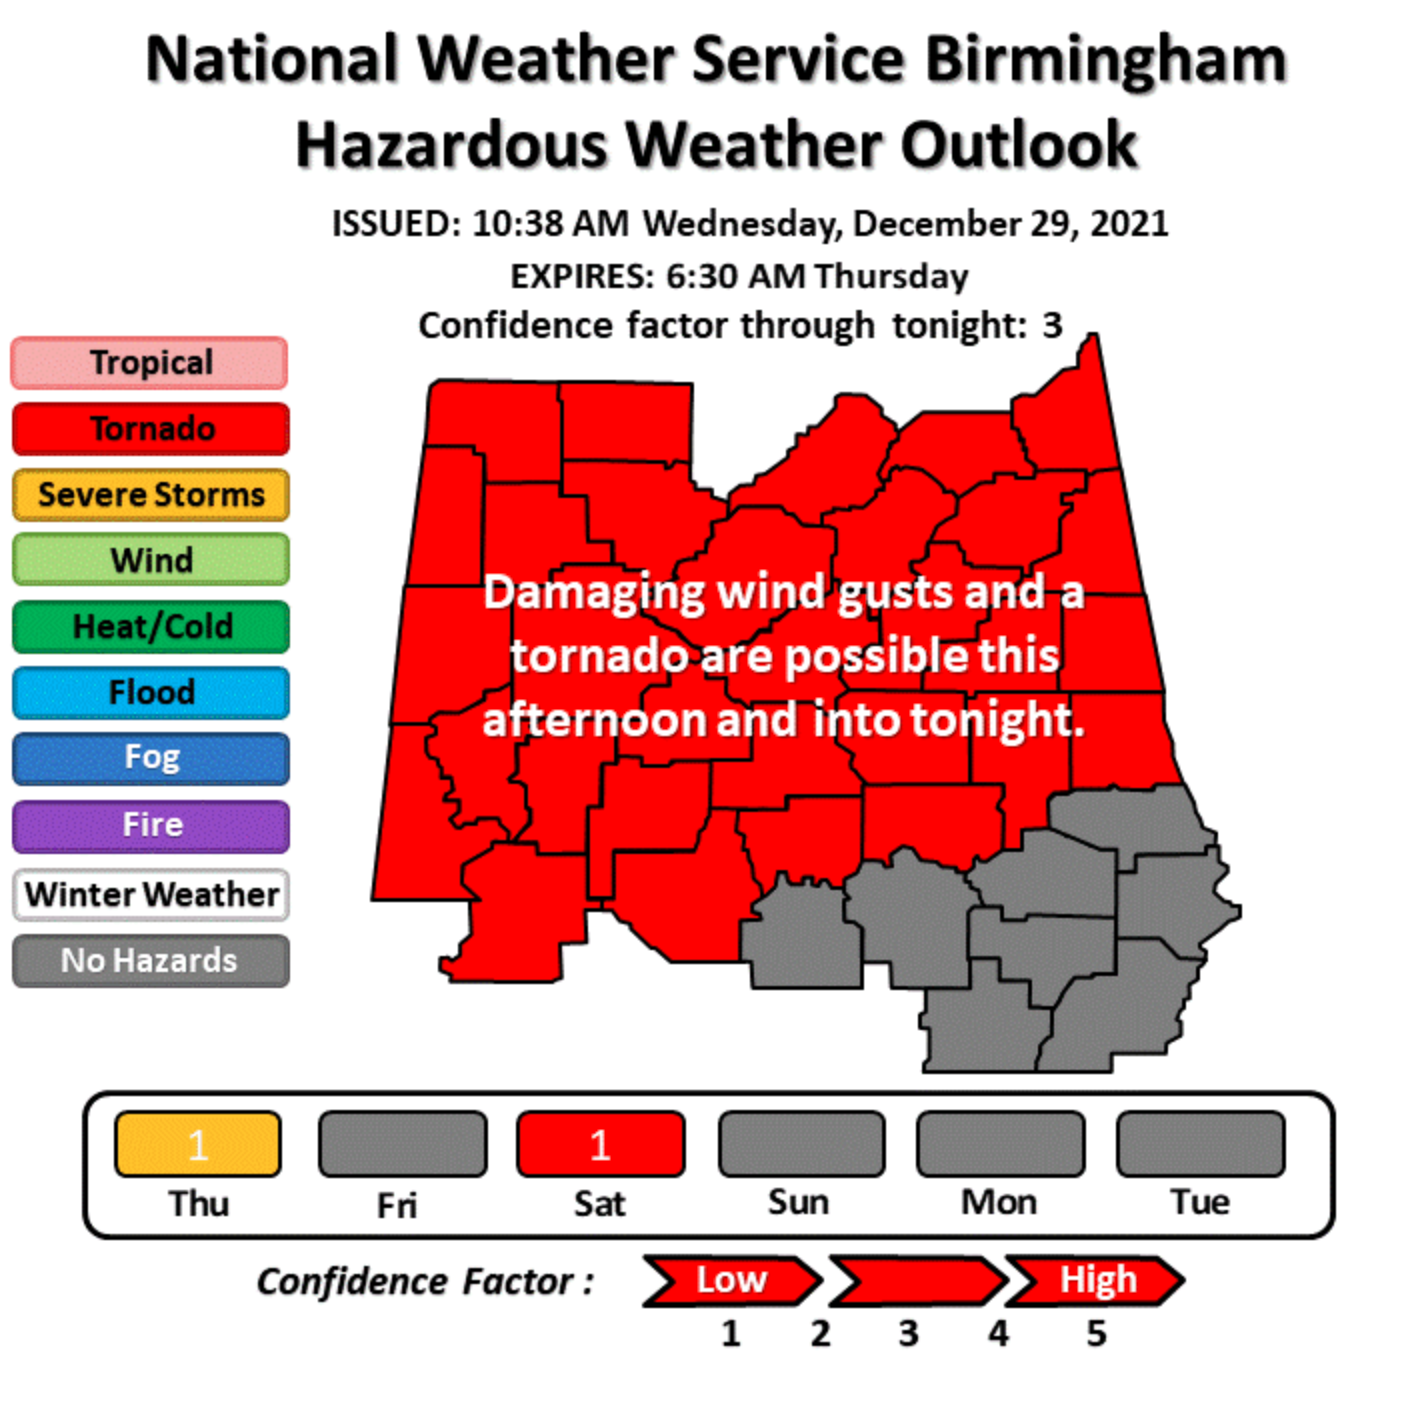 Trussville City Schools plan to open storm shelters for severe weather